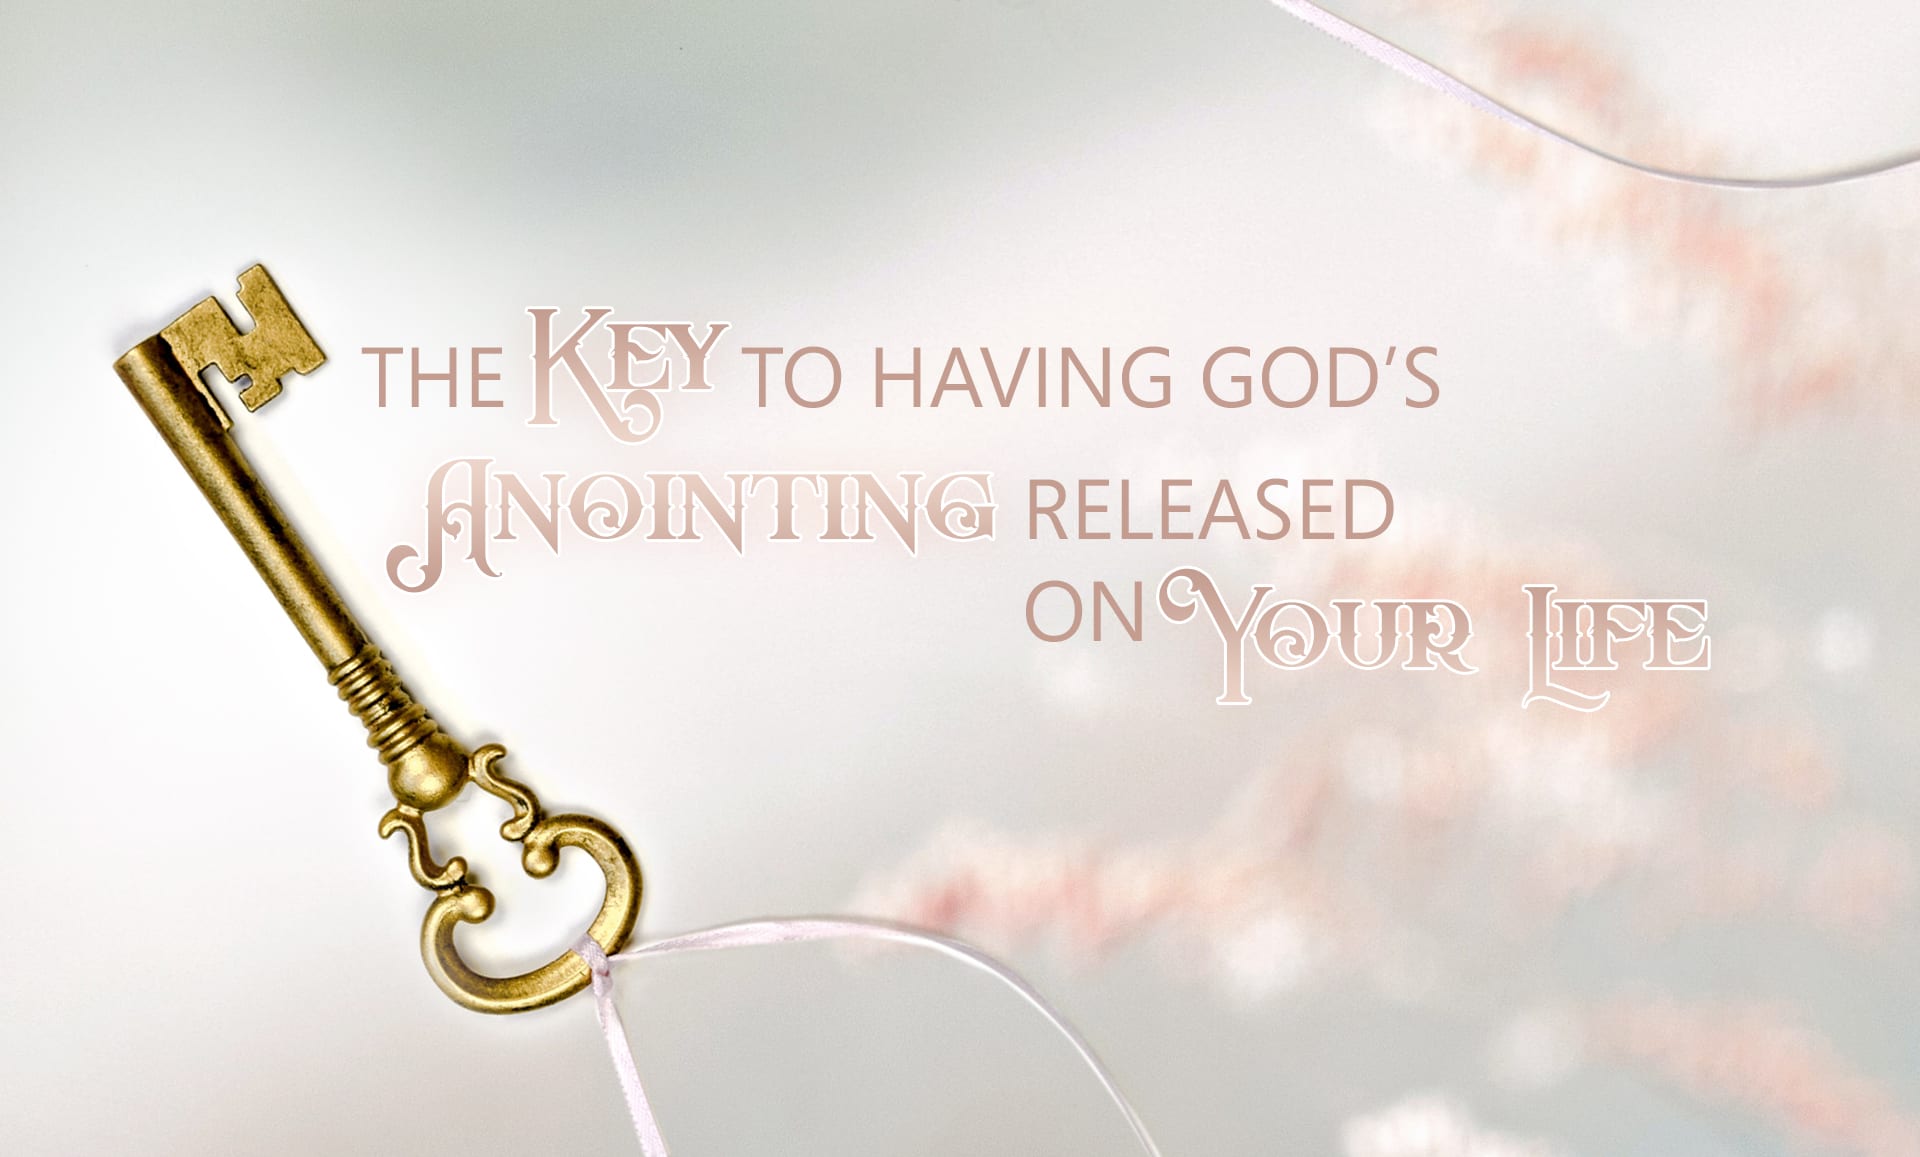 The Key to Having God's Anointing Released